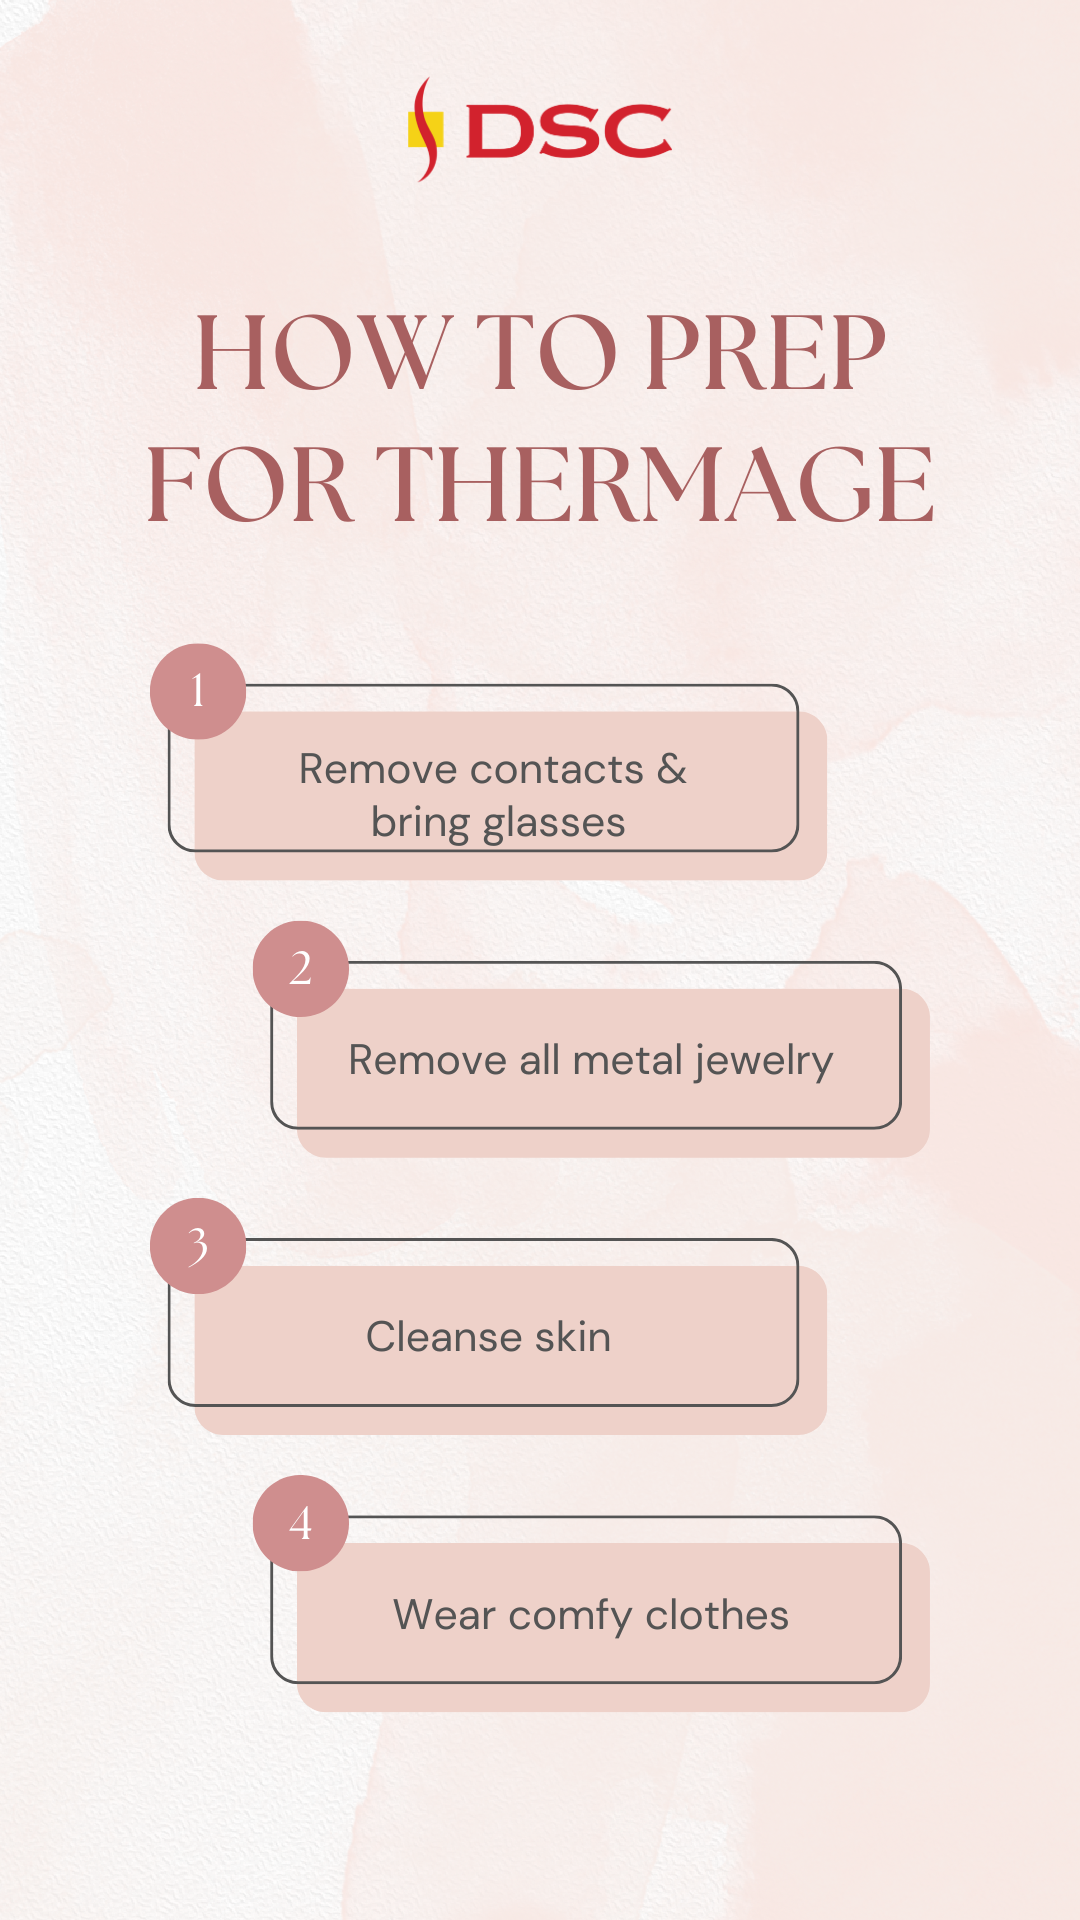 DSC blog graphic titled "how to prep for thermage" at the top with the following text below: "remove contacts & bring glasses," "remove all metal jewelry," "cleanse skin," and "wear comfy clothes"